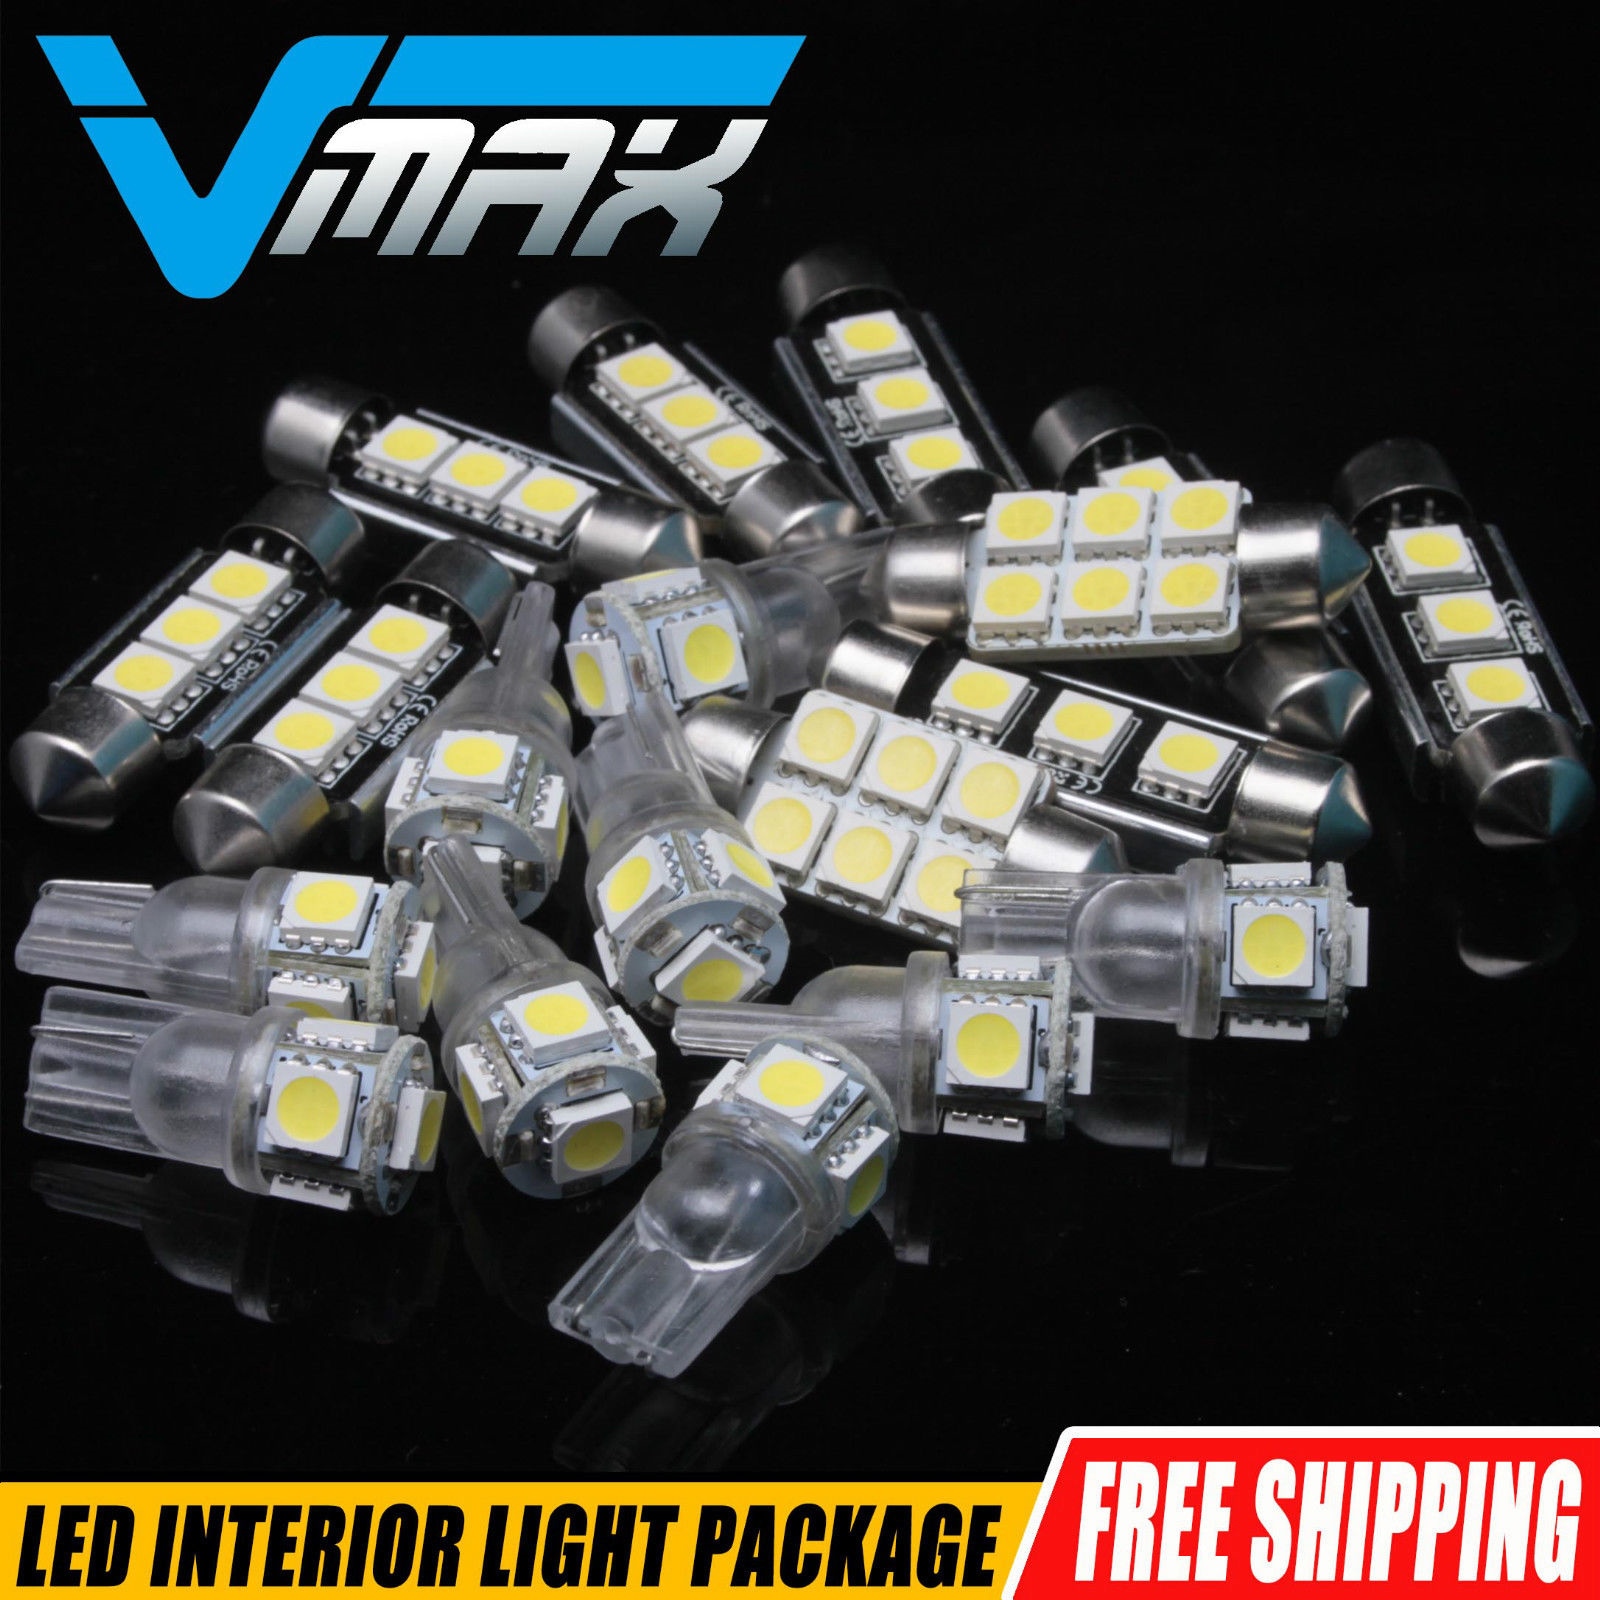 11x Xenon White LED Interior Lights Package For 2002-2003 Nissan Maxima 1Yr Wty